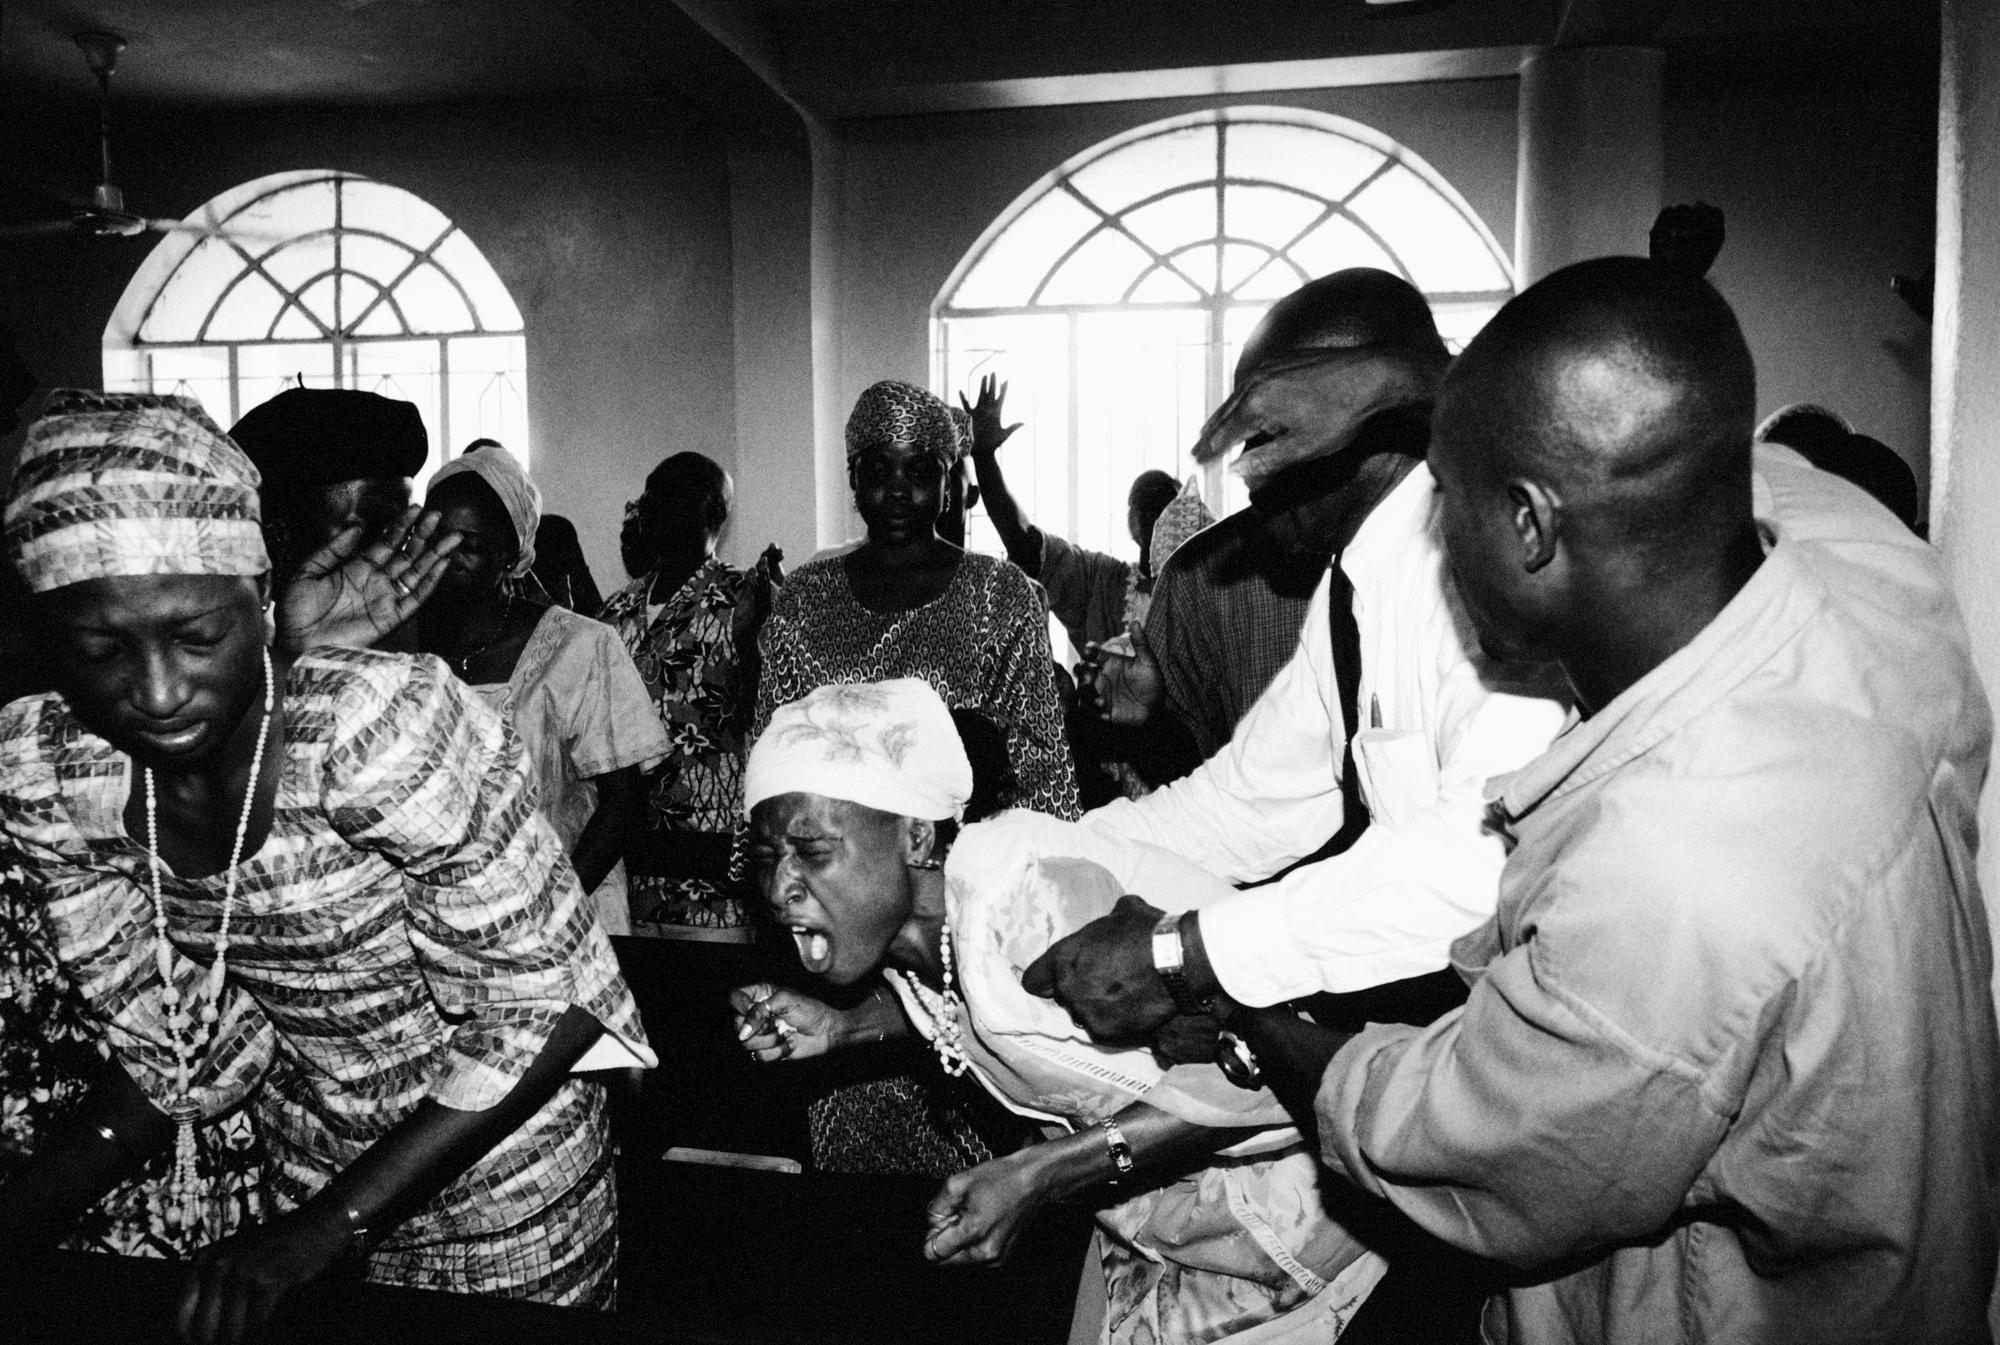 Born again - Sierra Leone, Freetown, May 2002
The Jesus Is Lord...